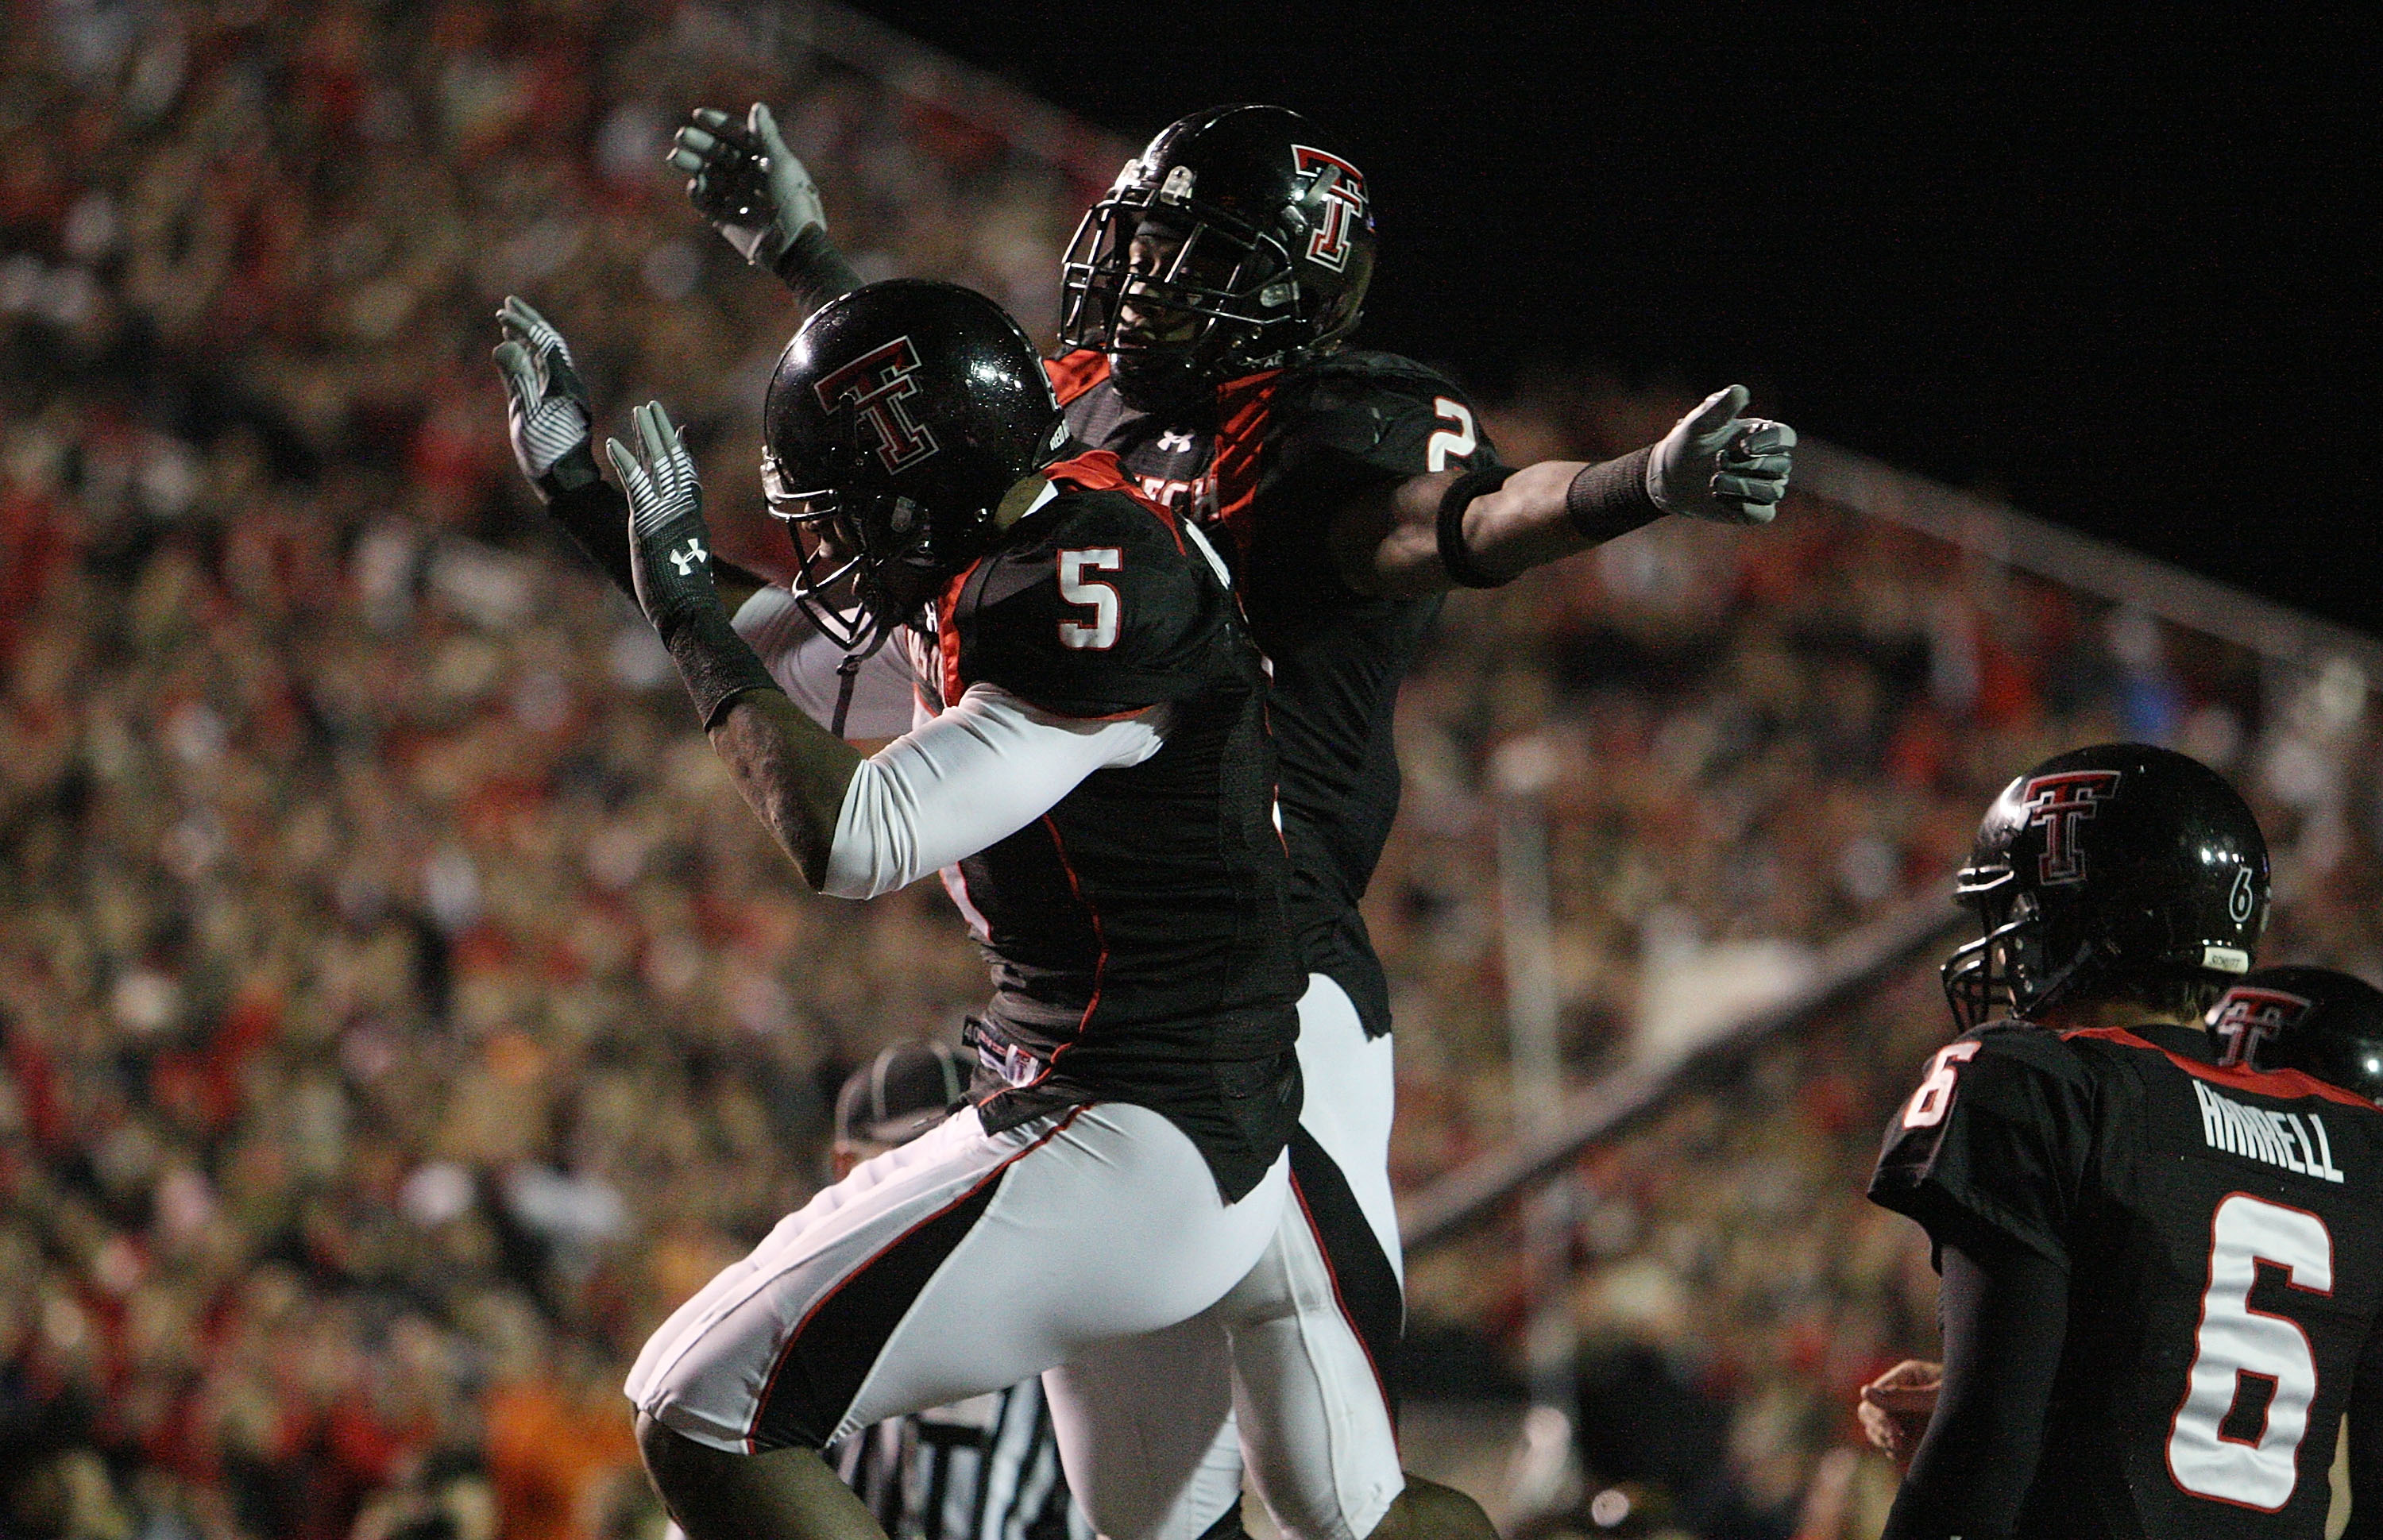 LUBBOCK, TX - NOVEMBER 08:  Wide receiver Michael Crabtree #5 of the Texas Tech Red Raiders celebrates a touchdown with Shannon Woods #2 during play against the Oklahoma State Cowboys at Jones AT&T Stadium on November 8, 2008 in Lubbock, Texas.  (Photo by